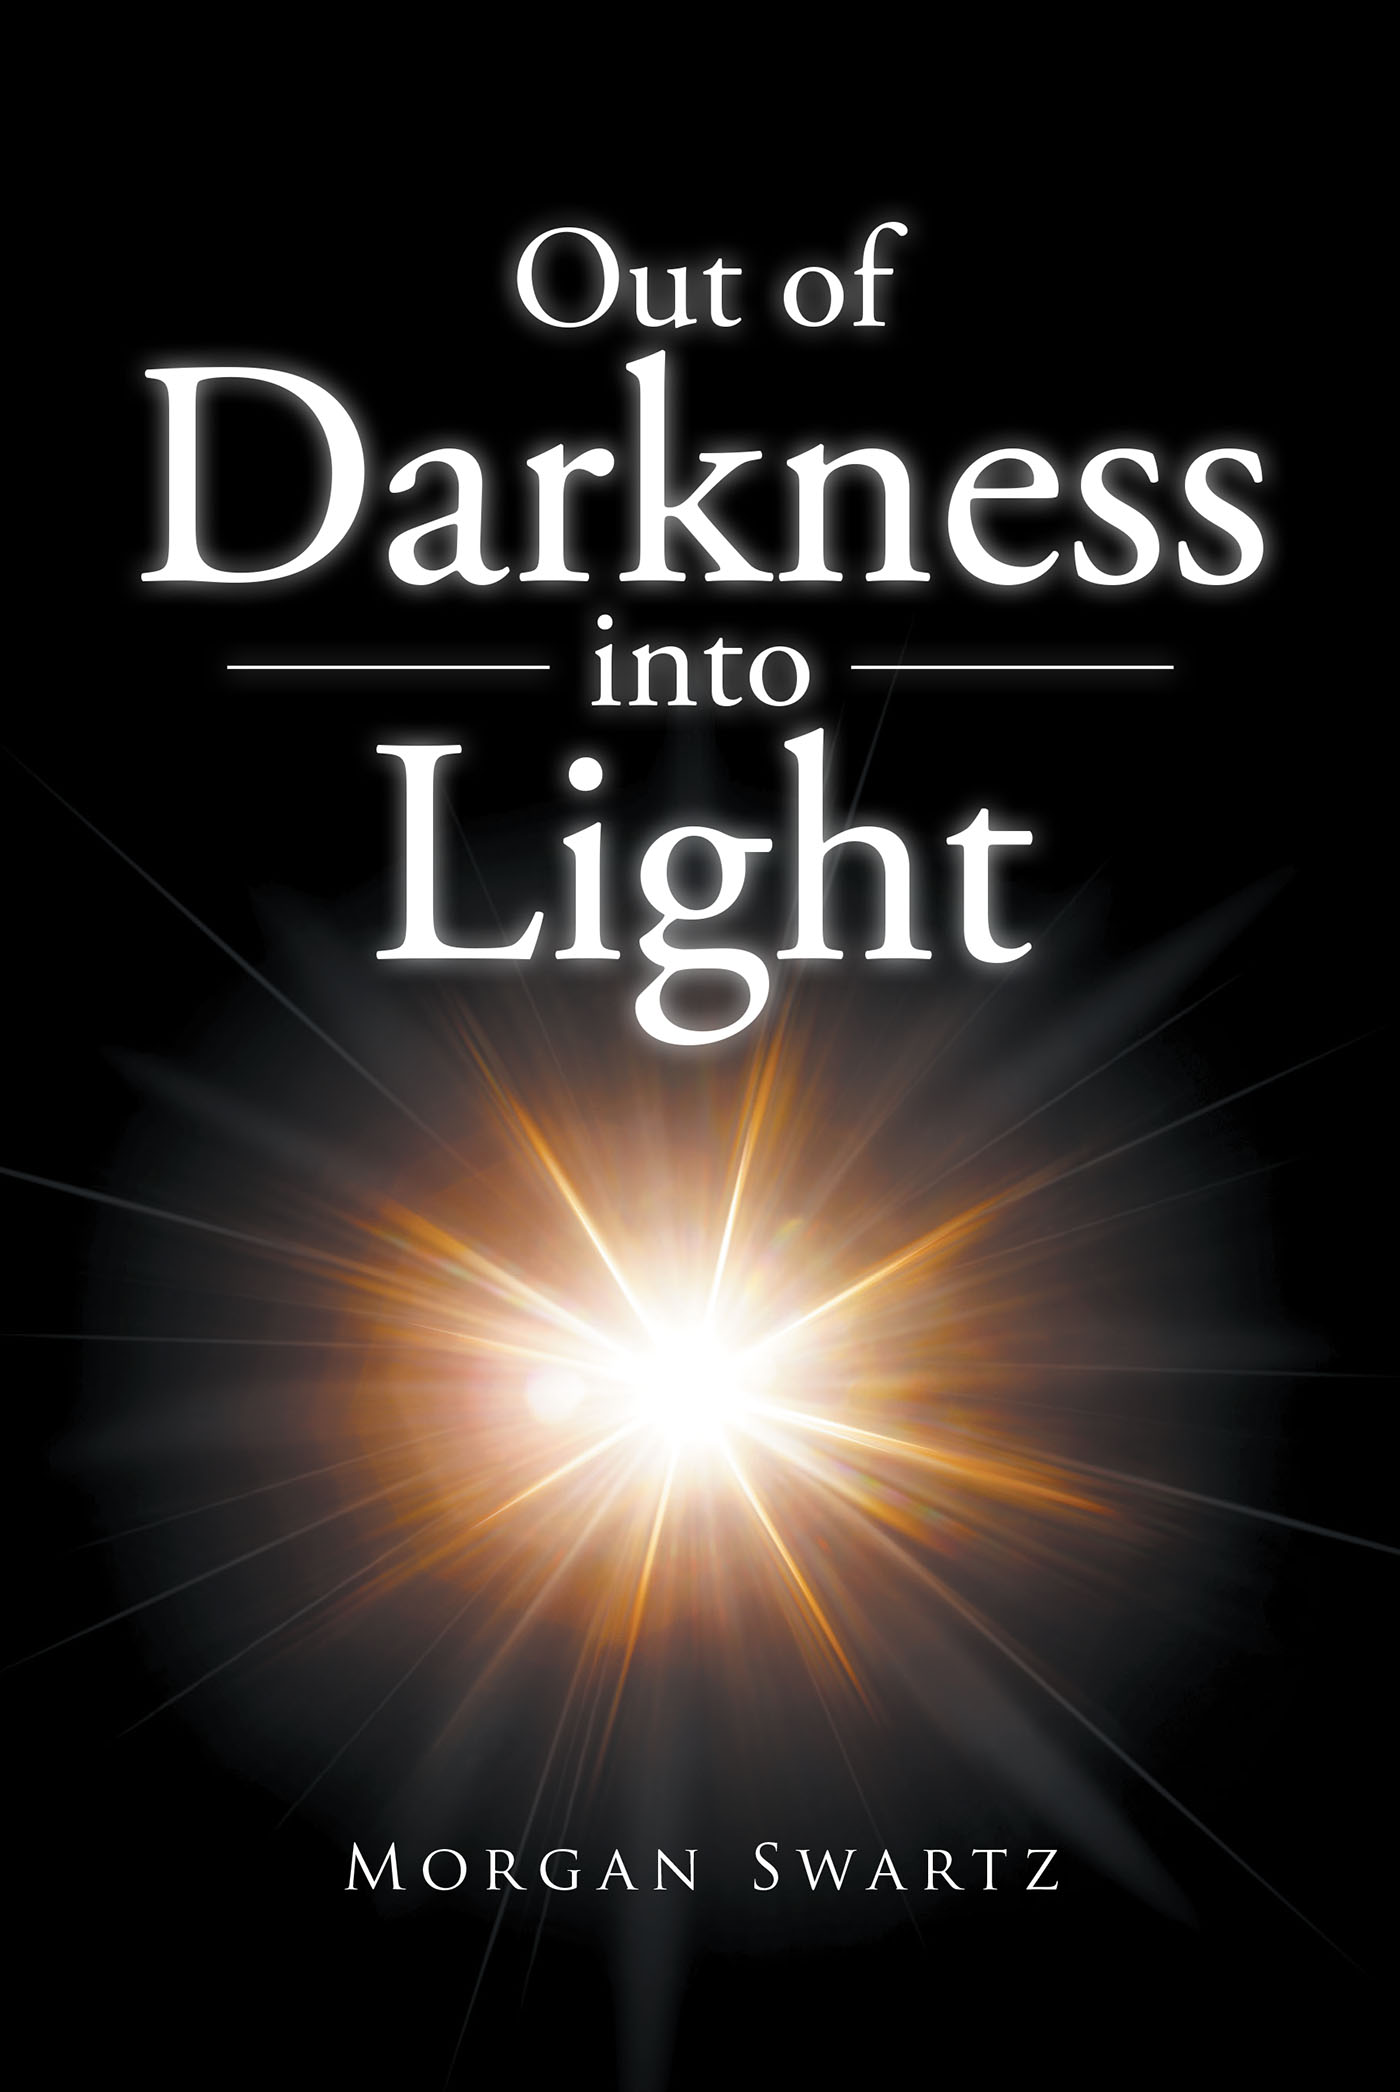 Author Morgan Swartz’s New Book, "Out of Darkness Into Light," is a Captivating Story of How One Woman Found Love and a New Outlook on Life Through God’s Mercy